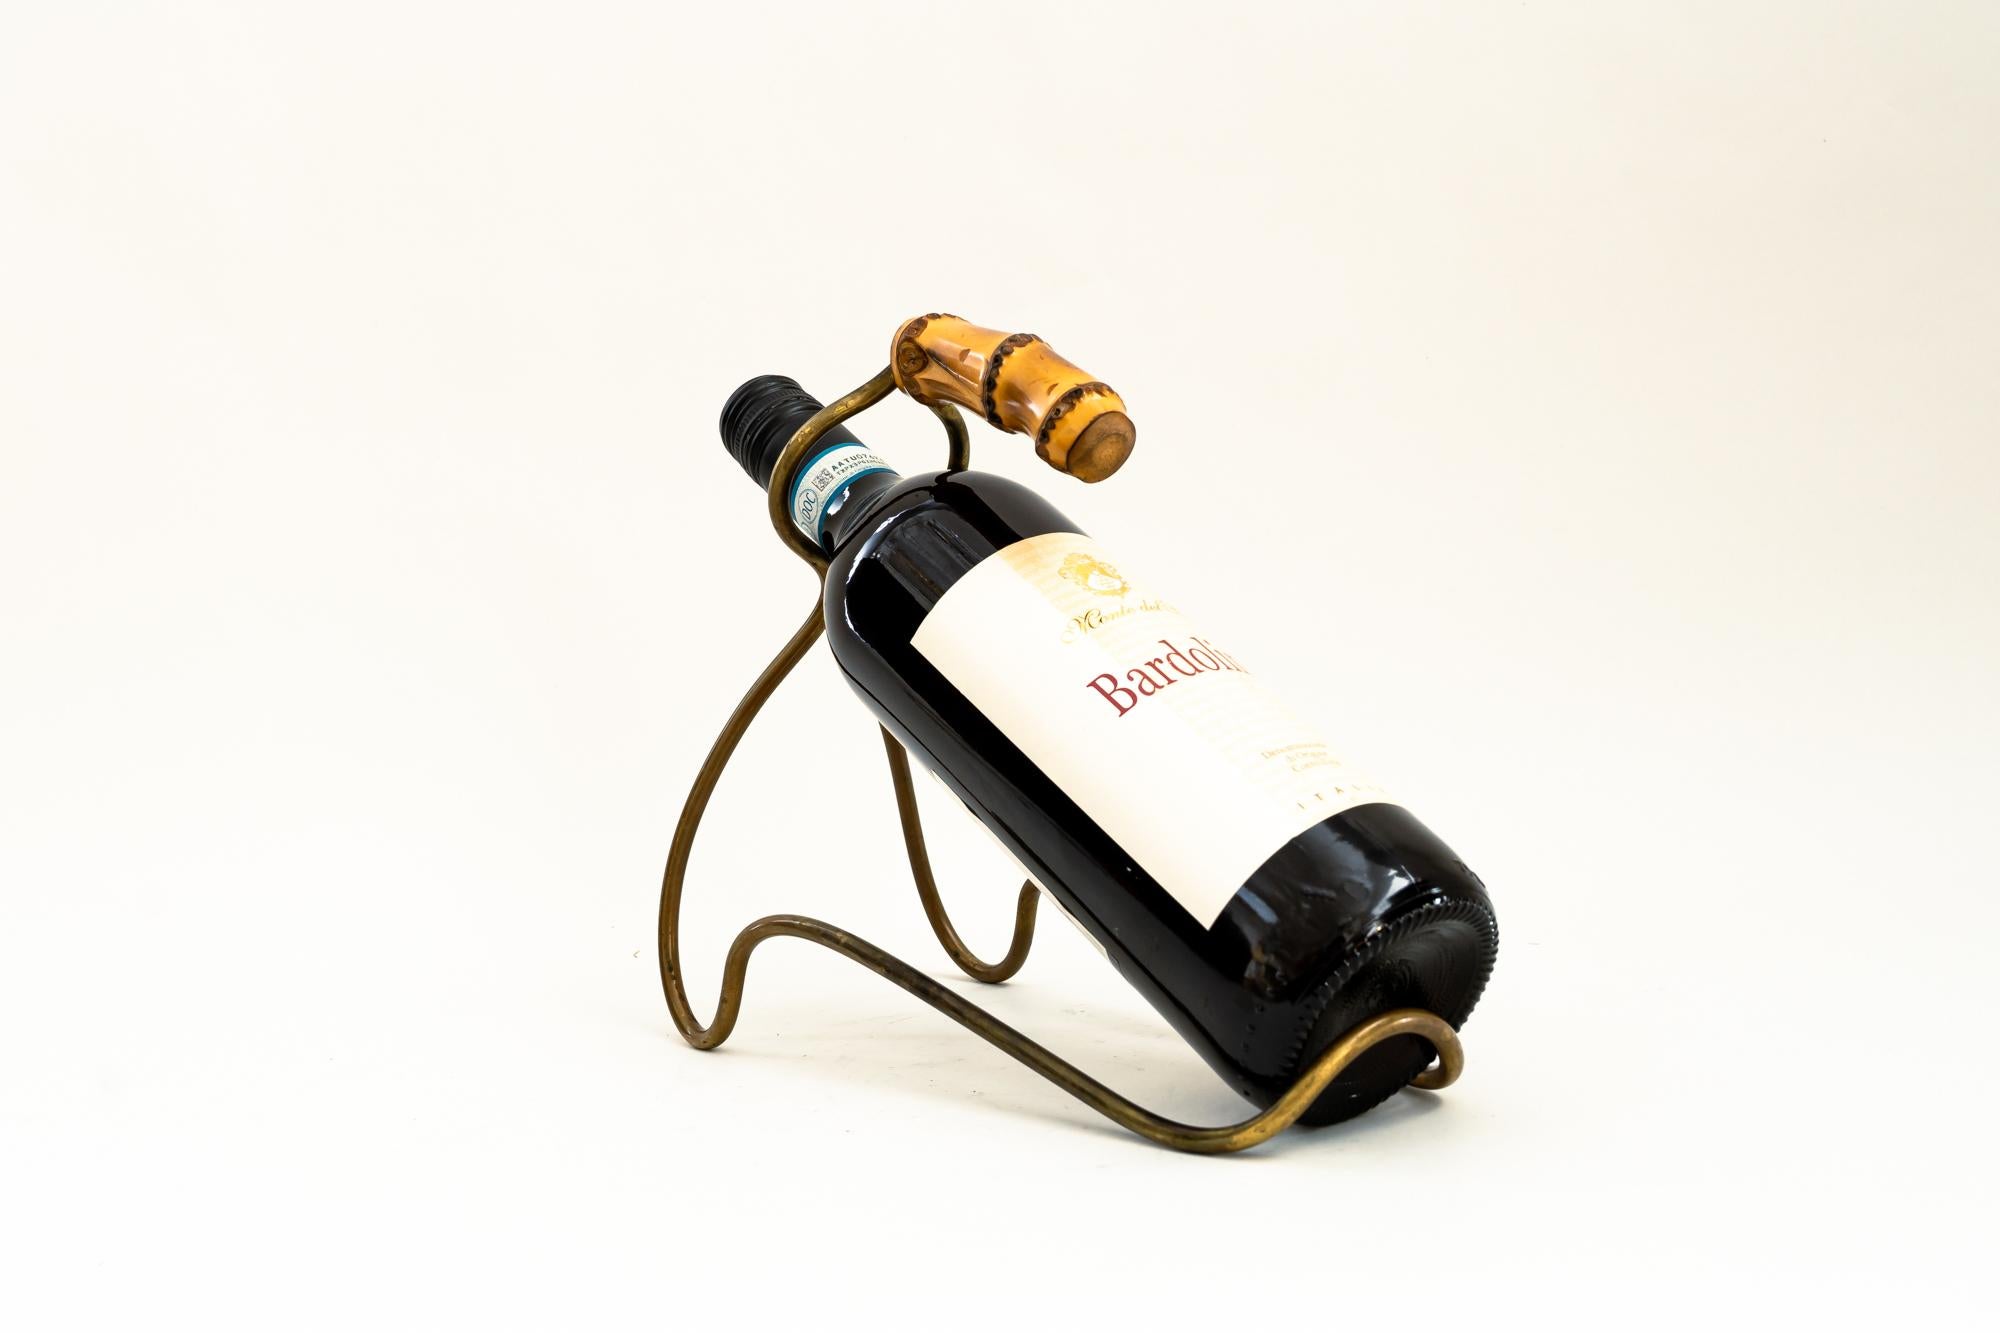 Bottle holder by Auböck Around, 1950s
Original condition
Bottle is not included (it is only for the Photoshooting).